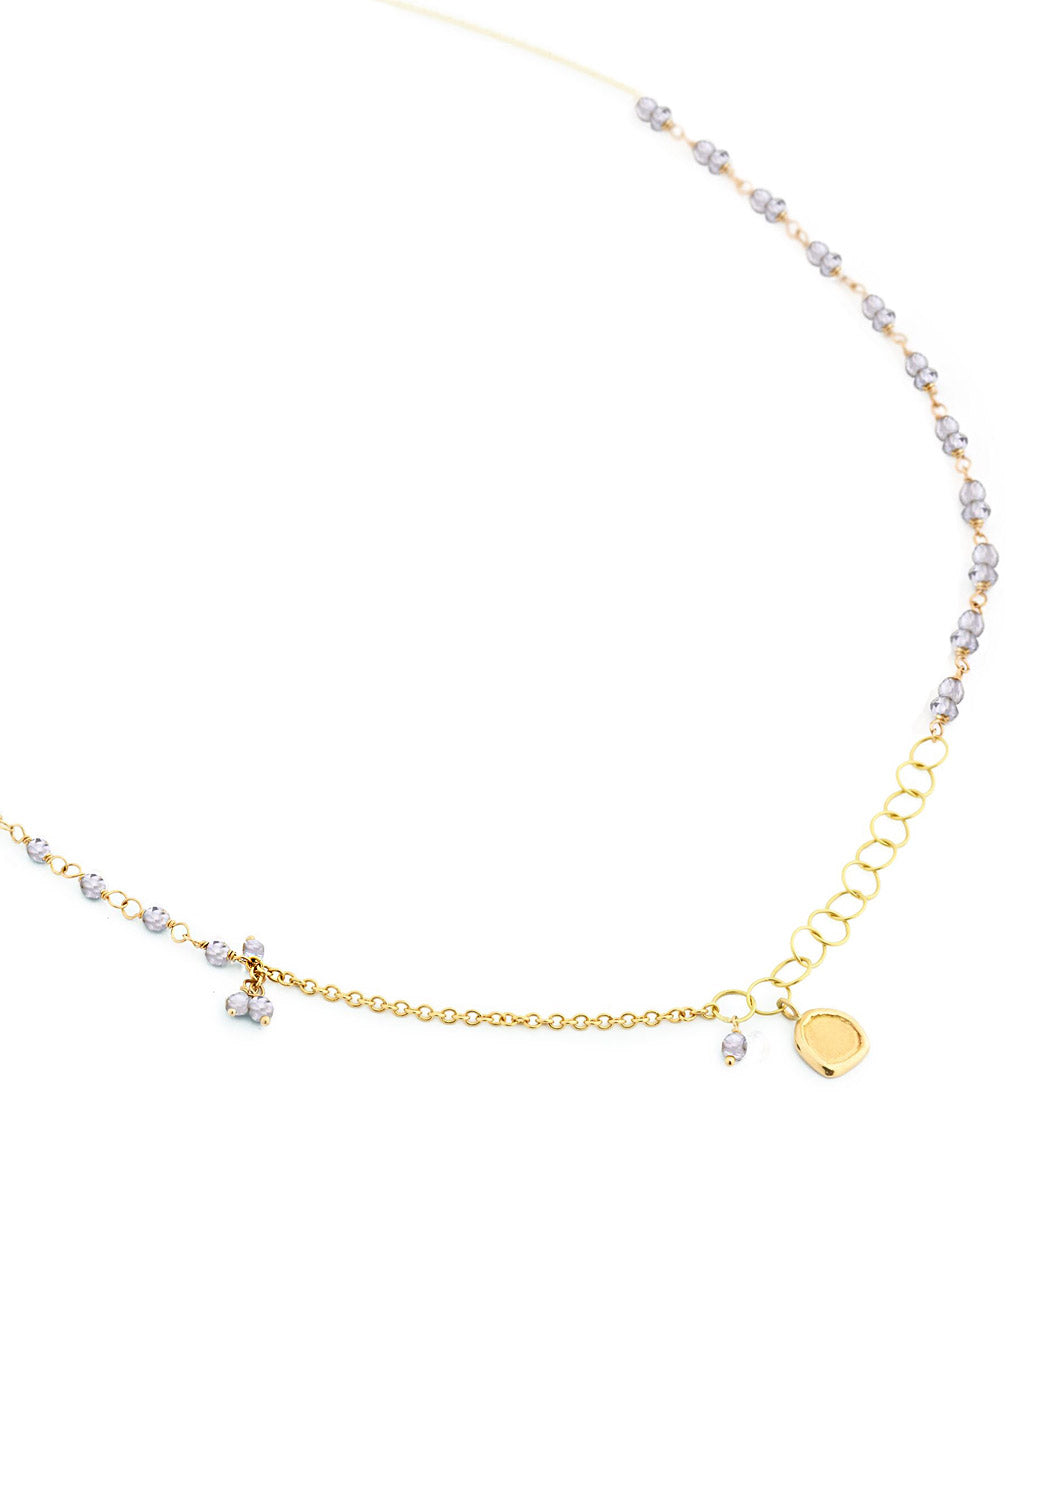 Anne Sportun Gold Tied Iolite Bead Chain Necklace | Ref.  N1257G-Iolite | OsterJewelers.com